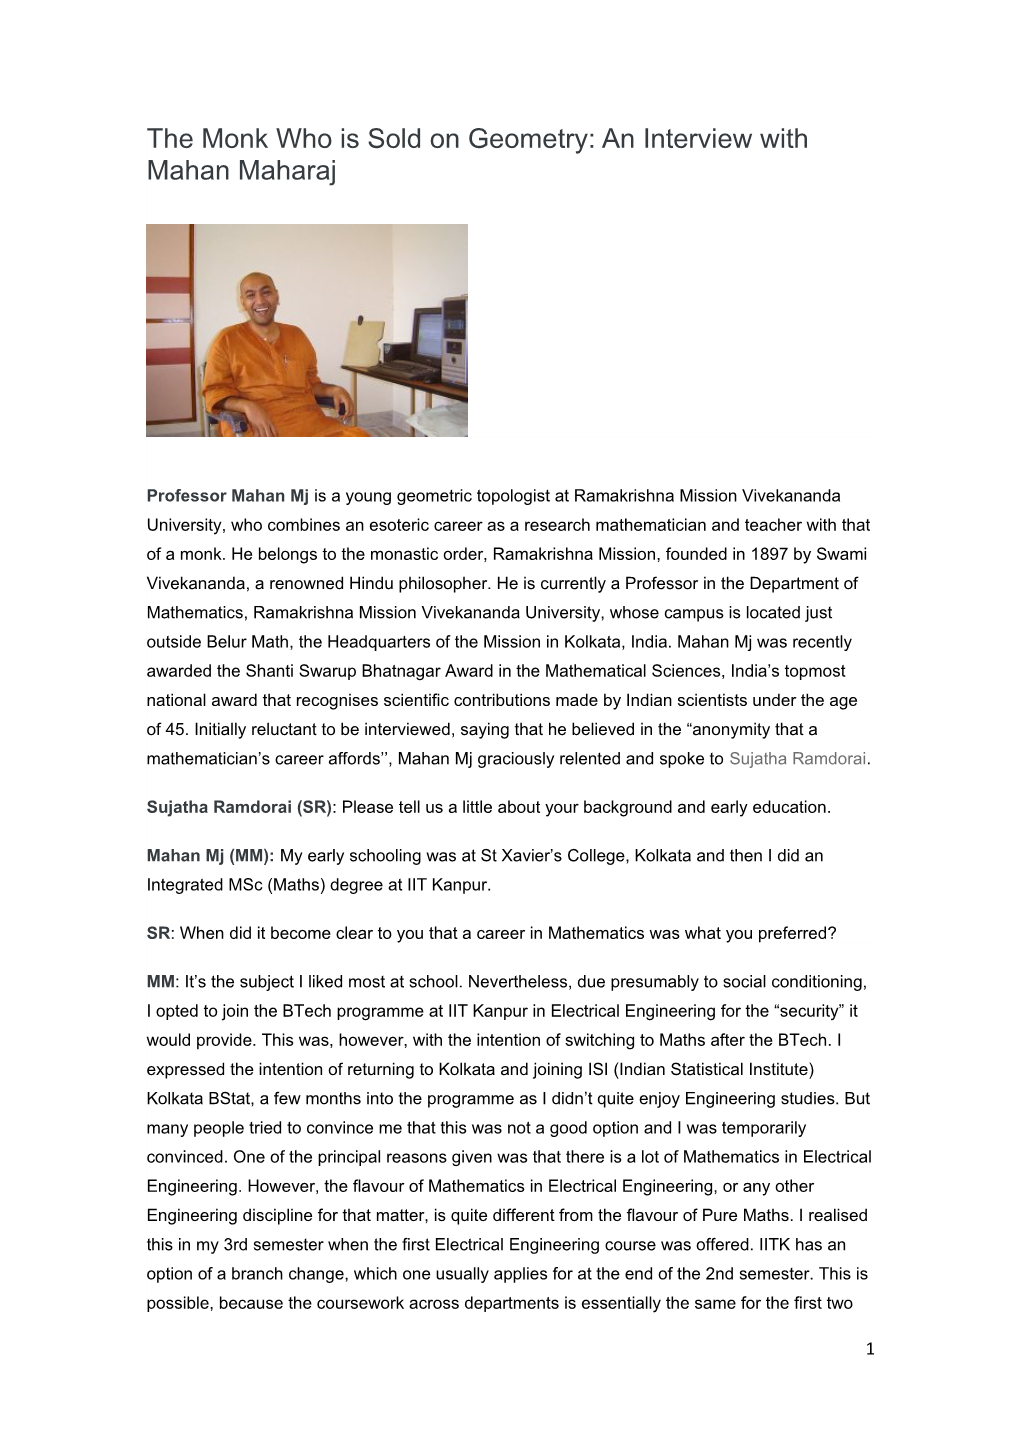 The Monk Who Is Sold on Geometry: an Interview with Mahan Maharaj